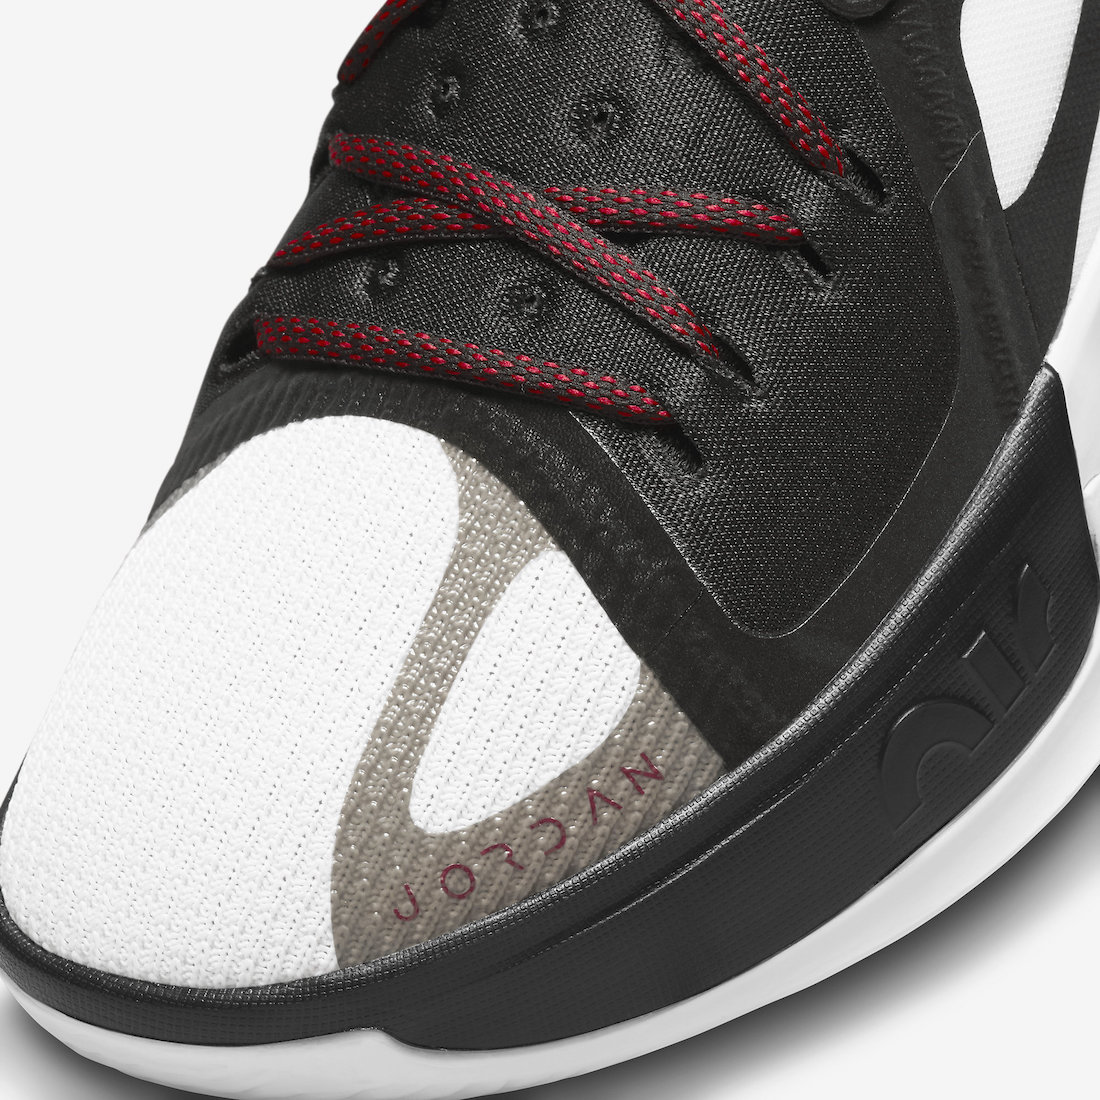 Jordan Zoom Separate PF Black White Gym Red DH0248-001 Release Date Info